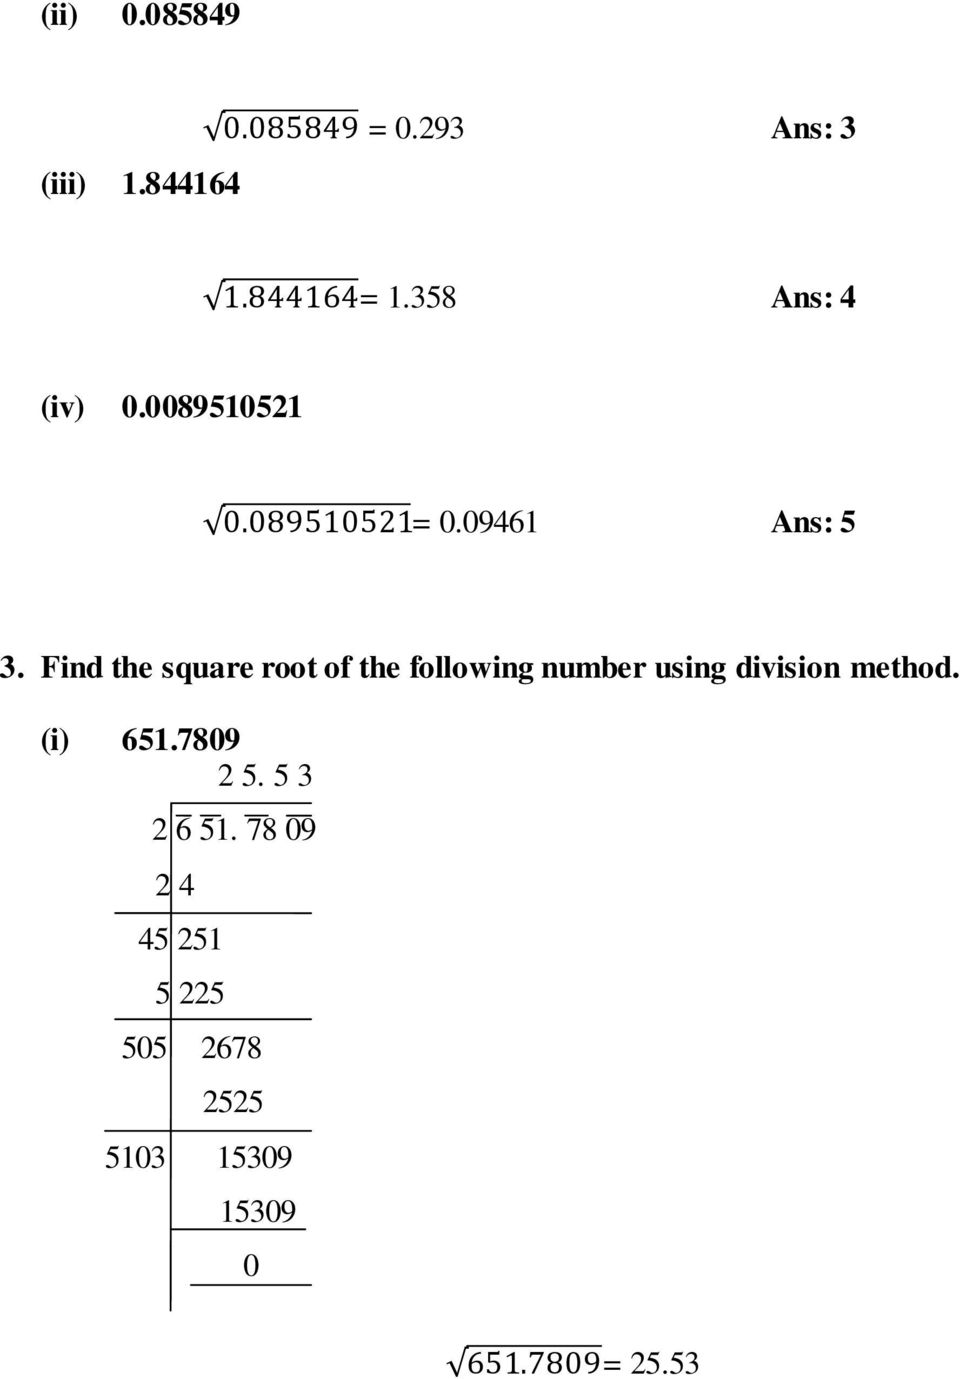 Find the square root of the following number using division method.